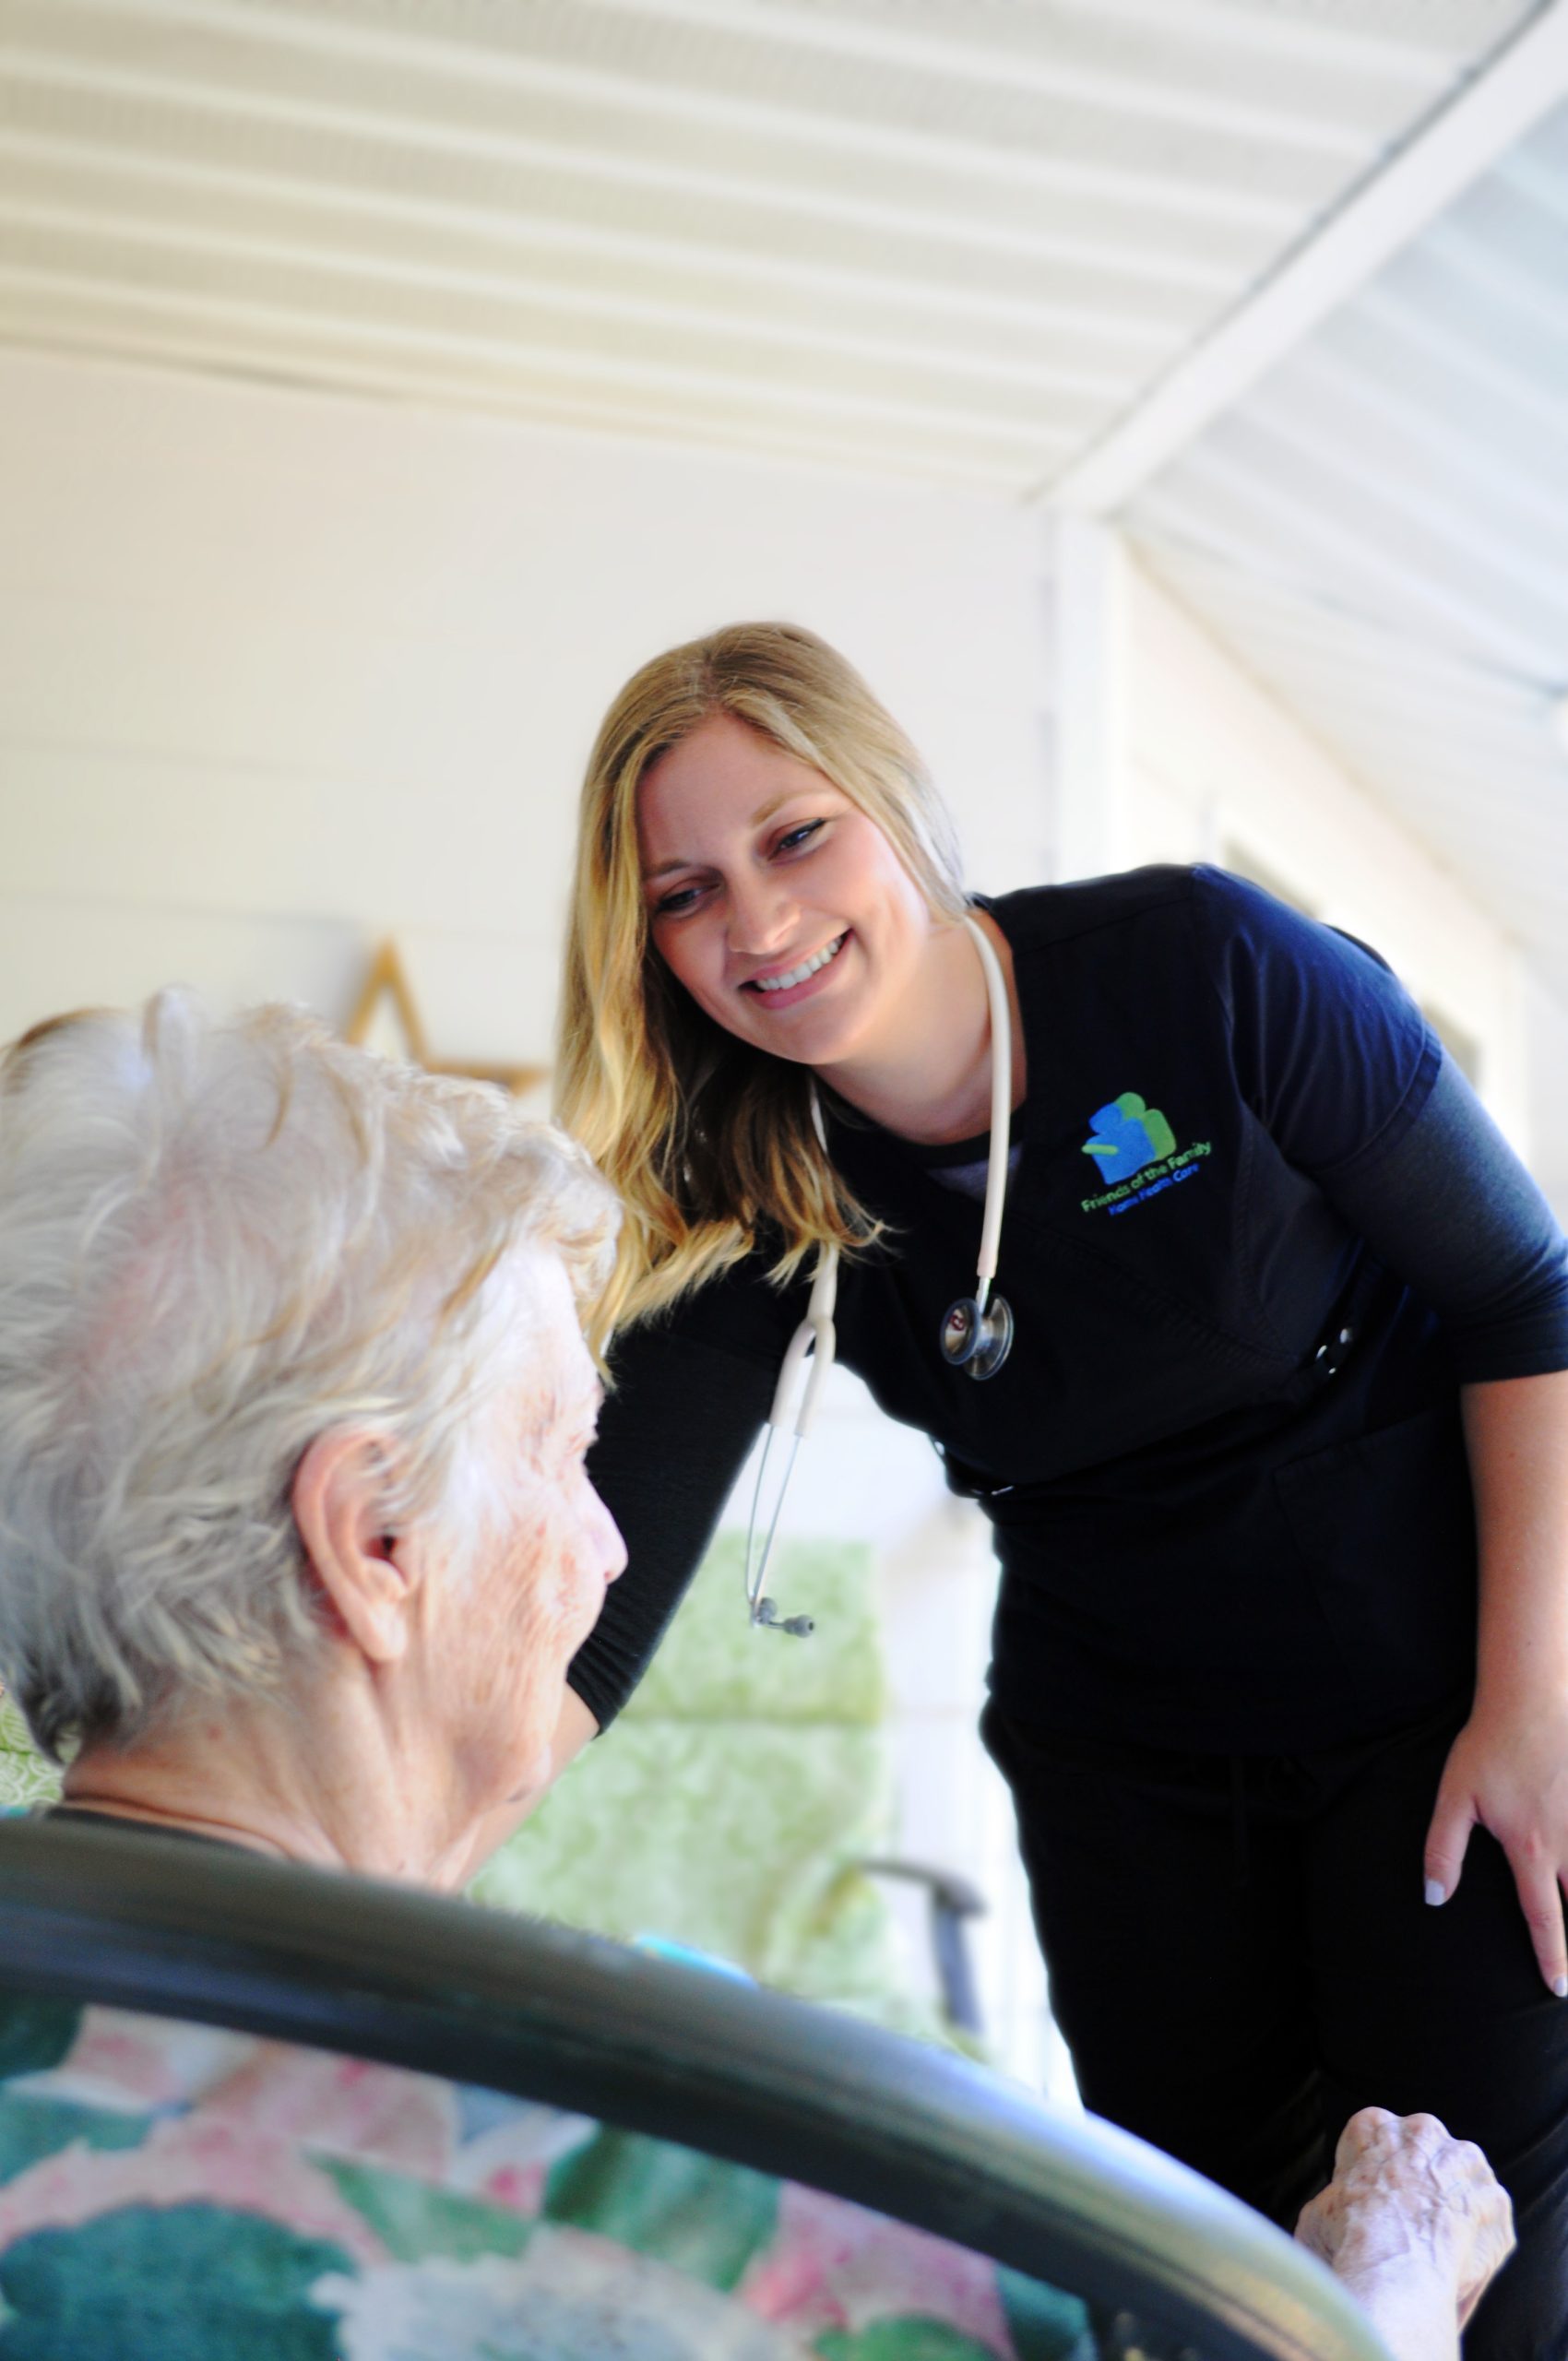 Home Health Aide assisting elderly companion care patient with personal hygiene.